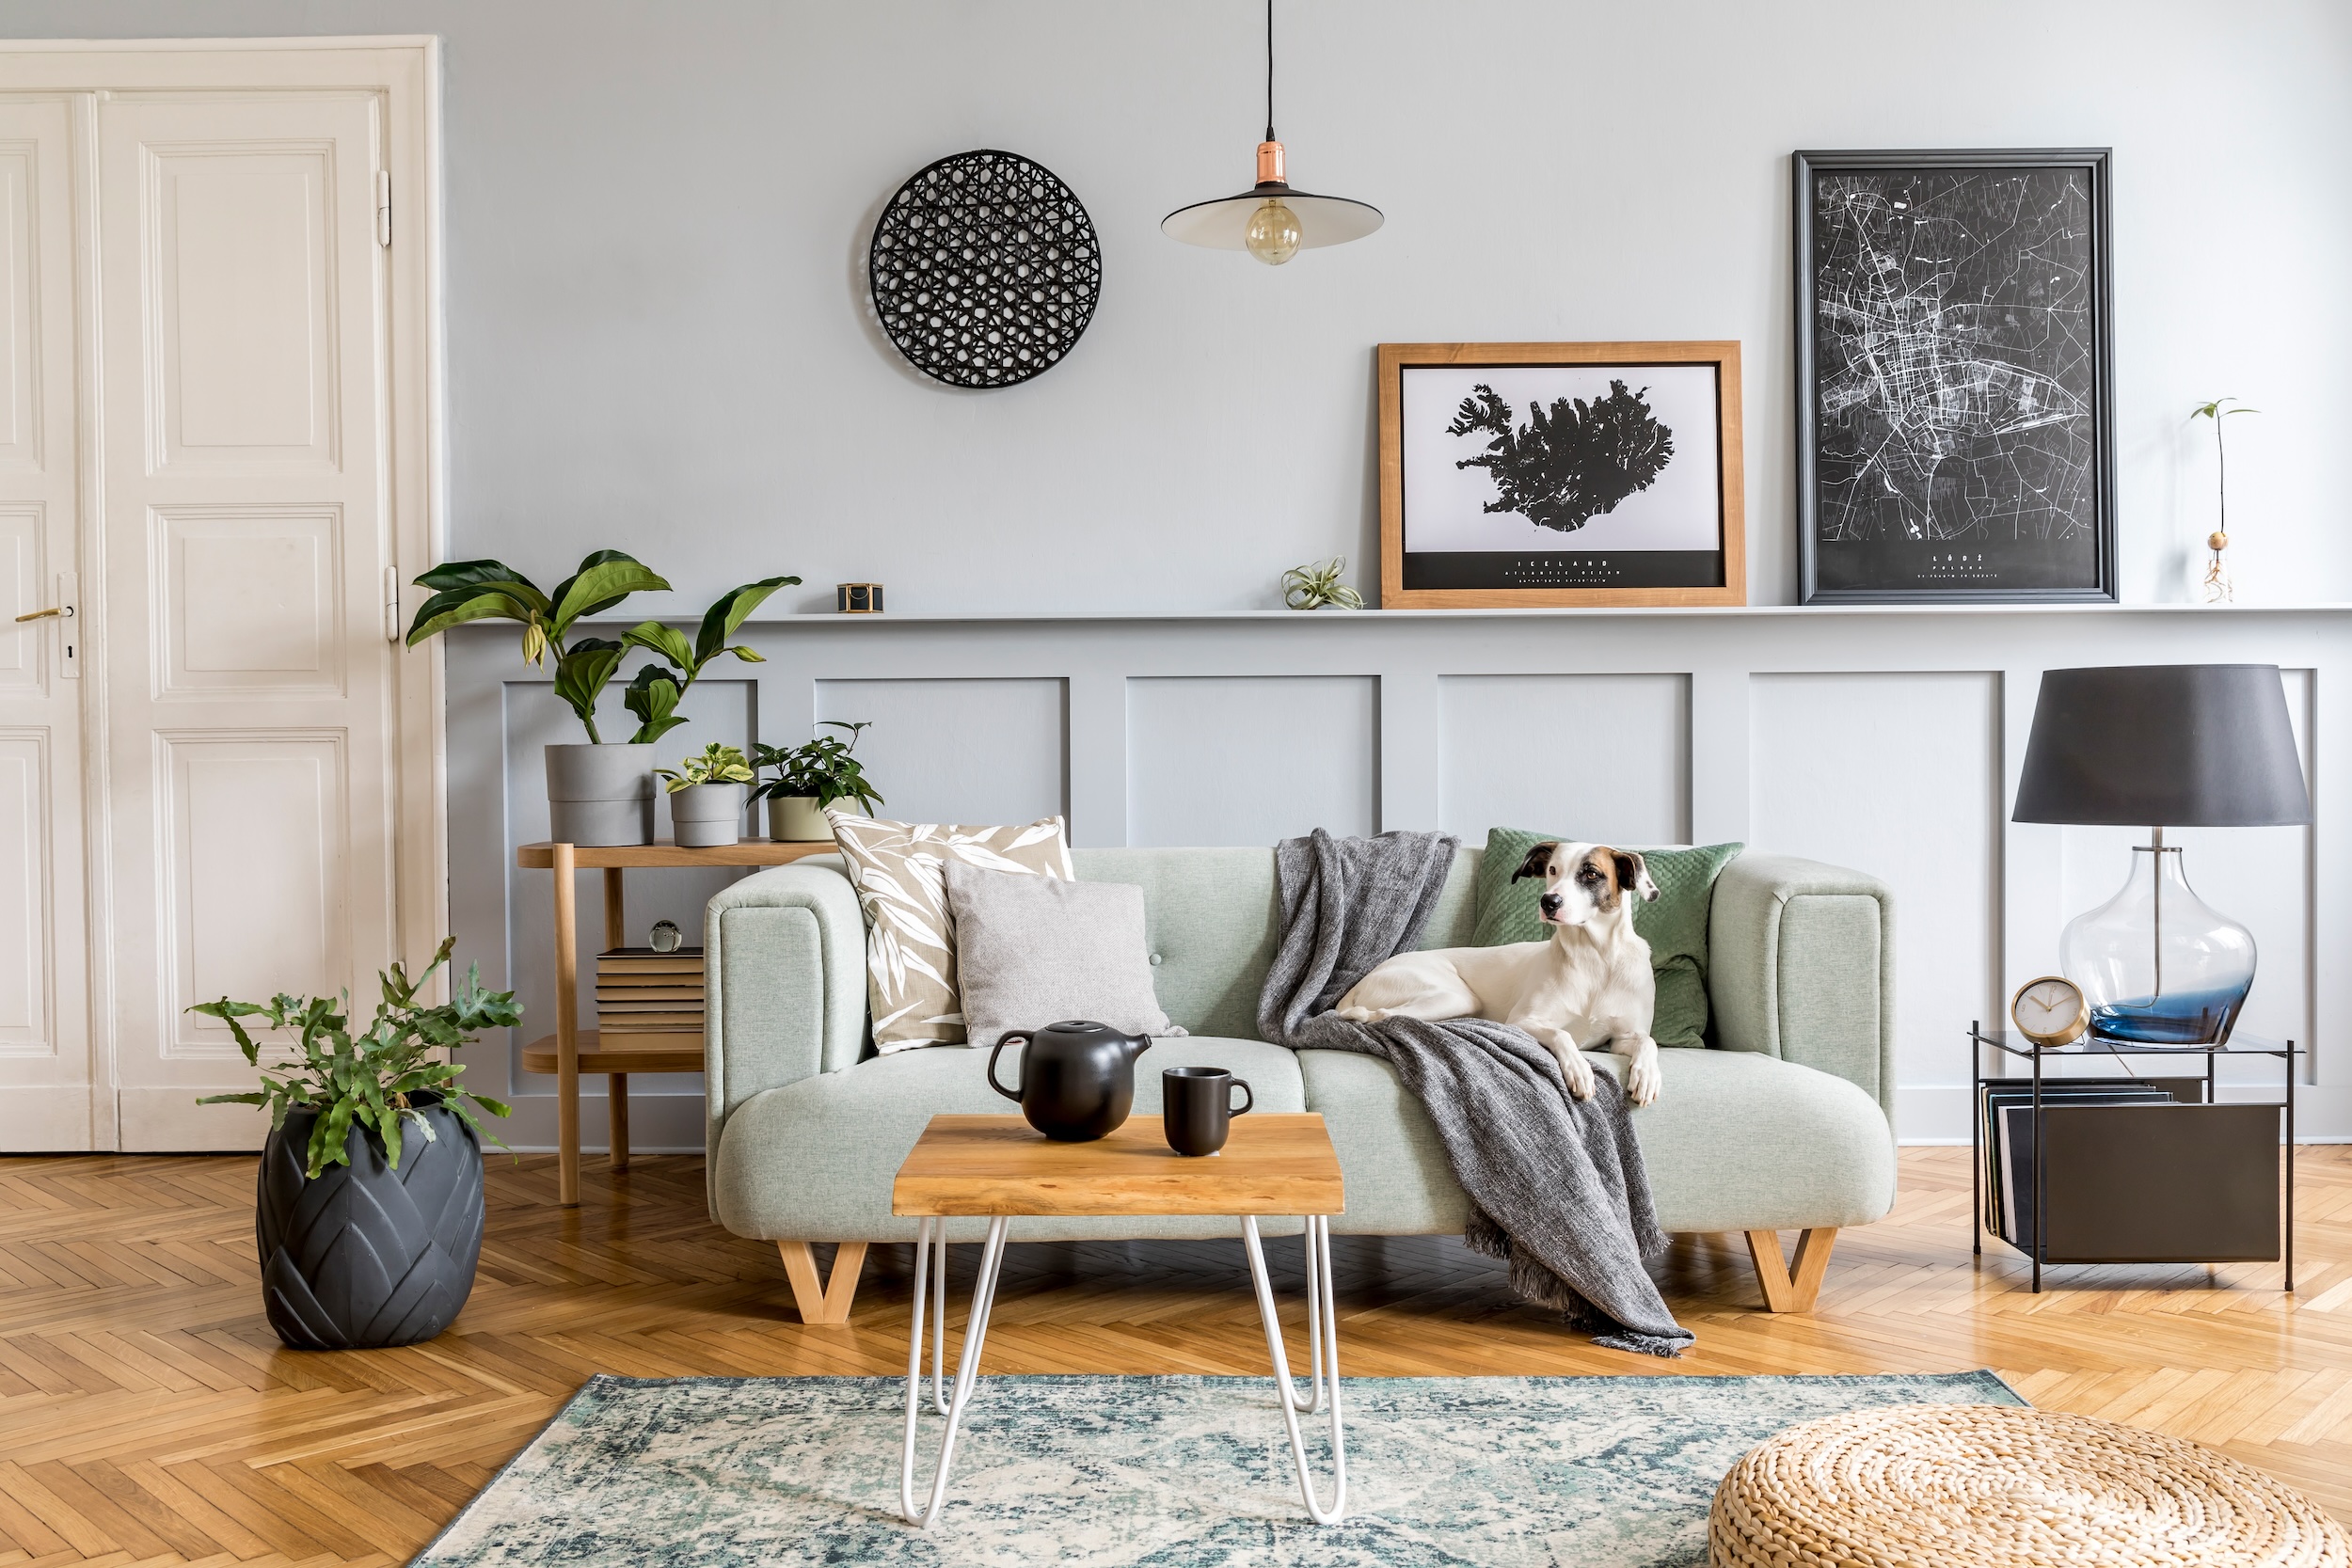 Discover quick, budget-friendly tips for impactful upgrades that'll increase your home's value and make it feel more like your dream home.